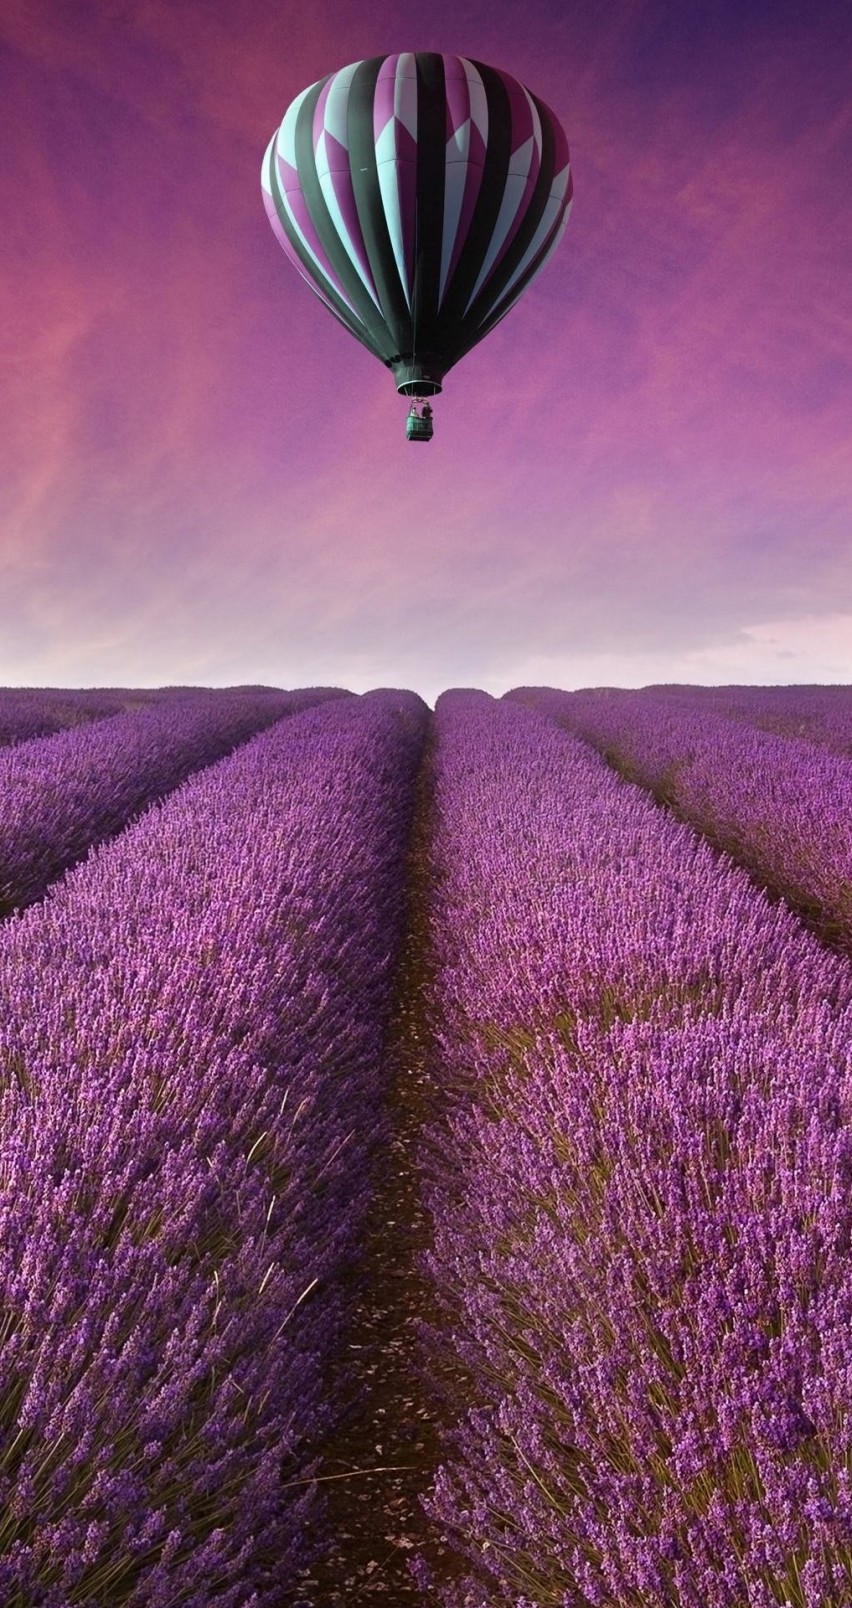 Hot Air Balloon Over Lavender Field Wallpaper for Apple iPhone 6 / 6s